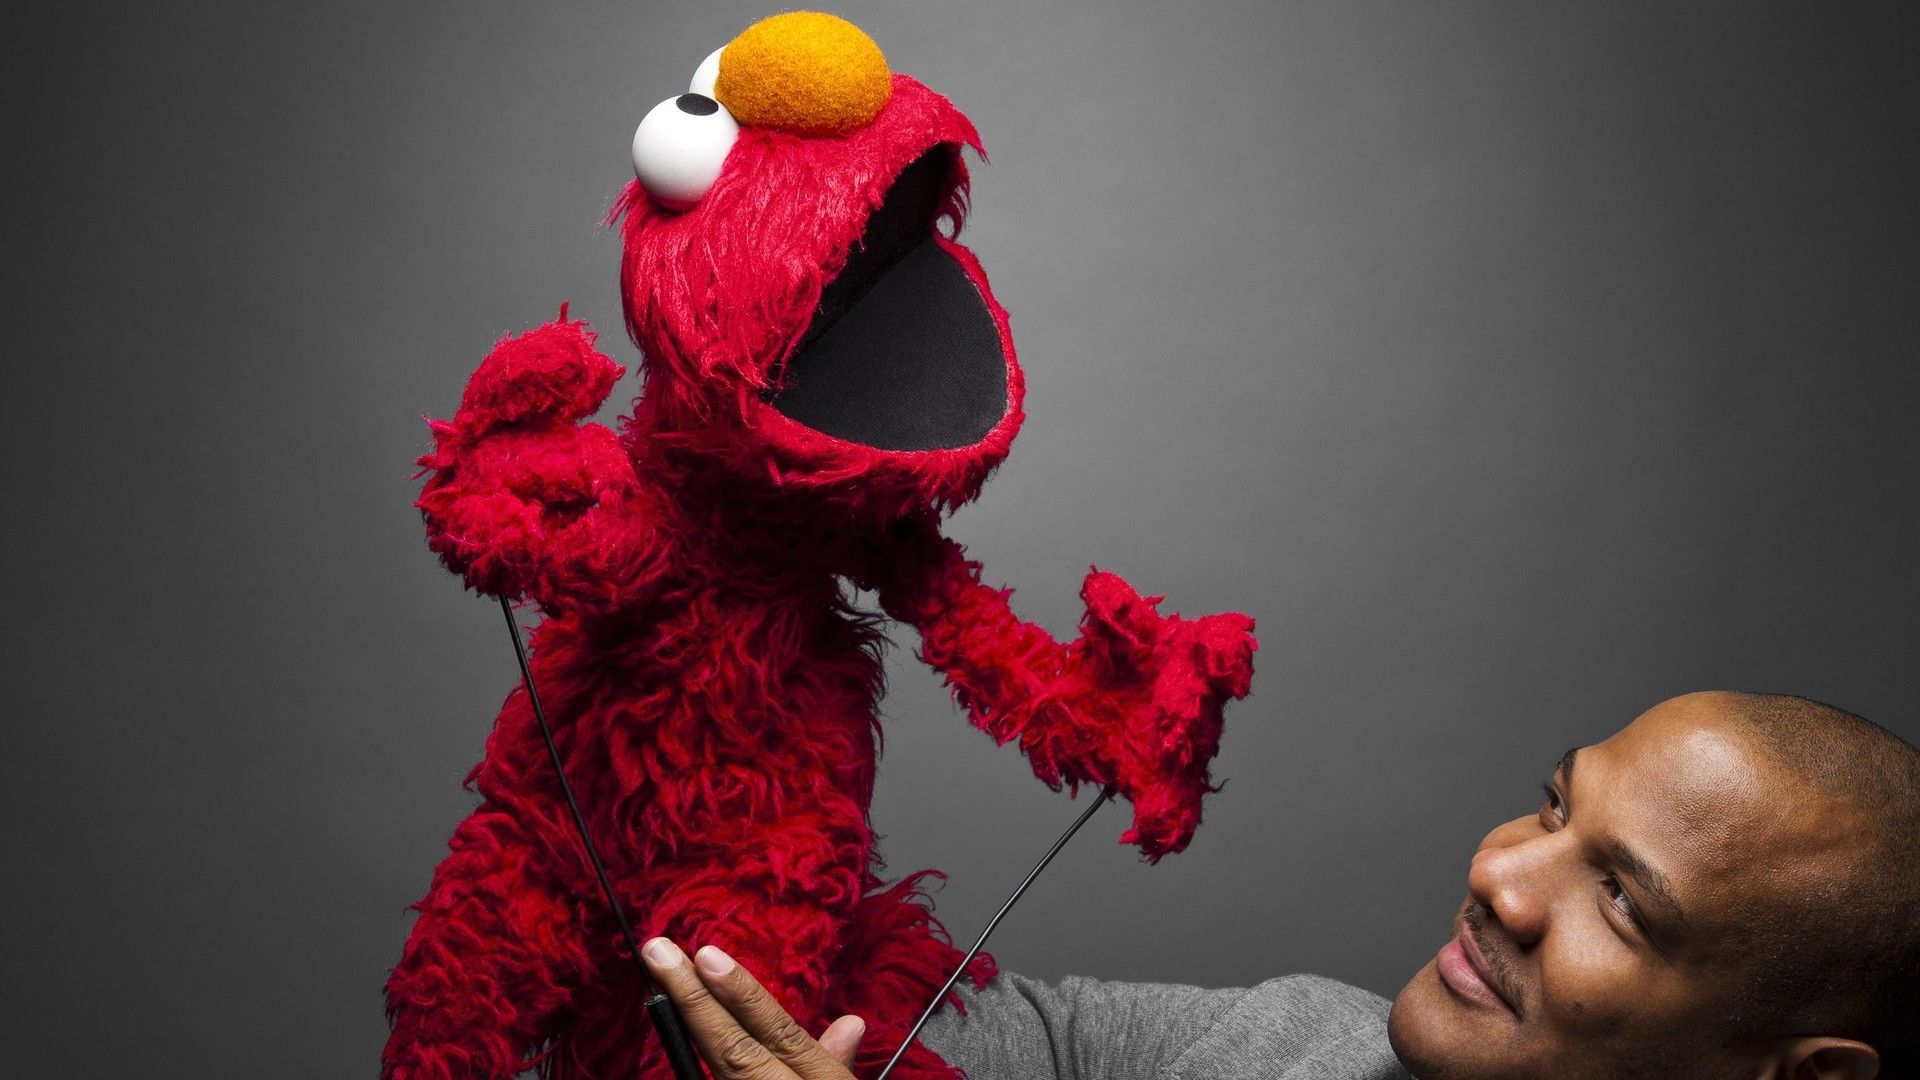 Being Elmo: A Puppeteer's Journey background